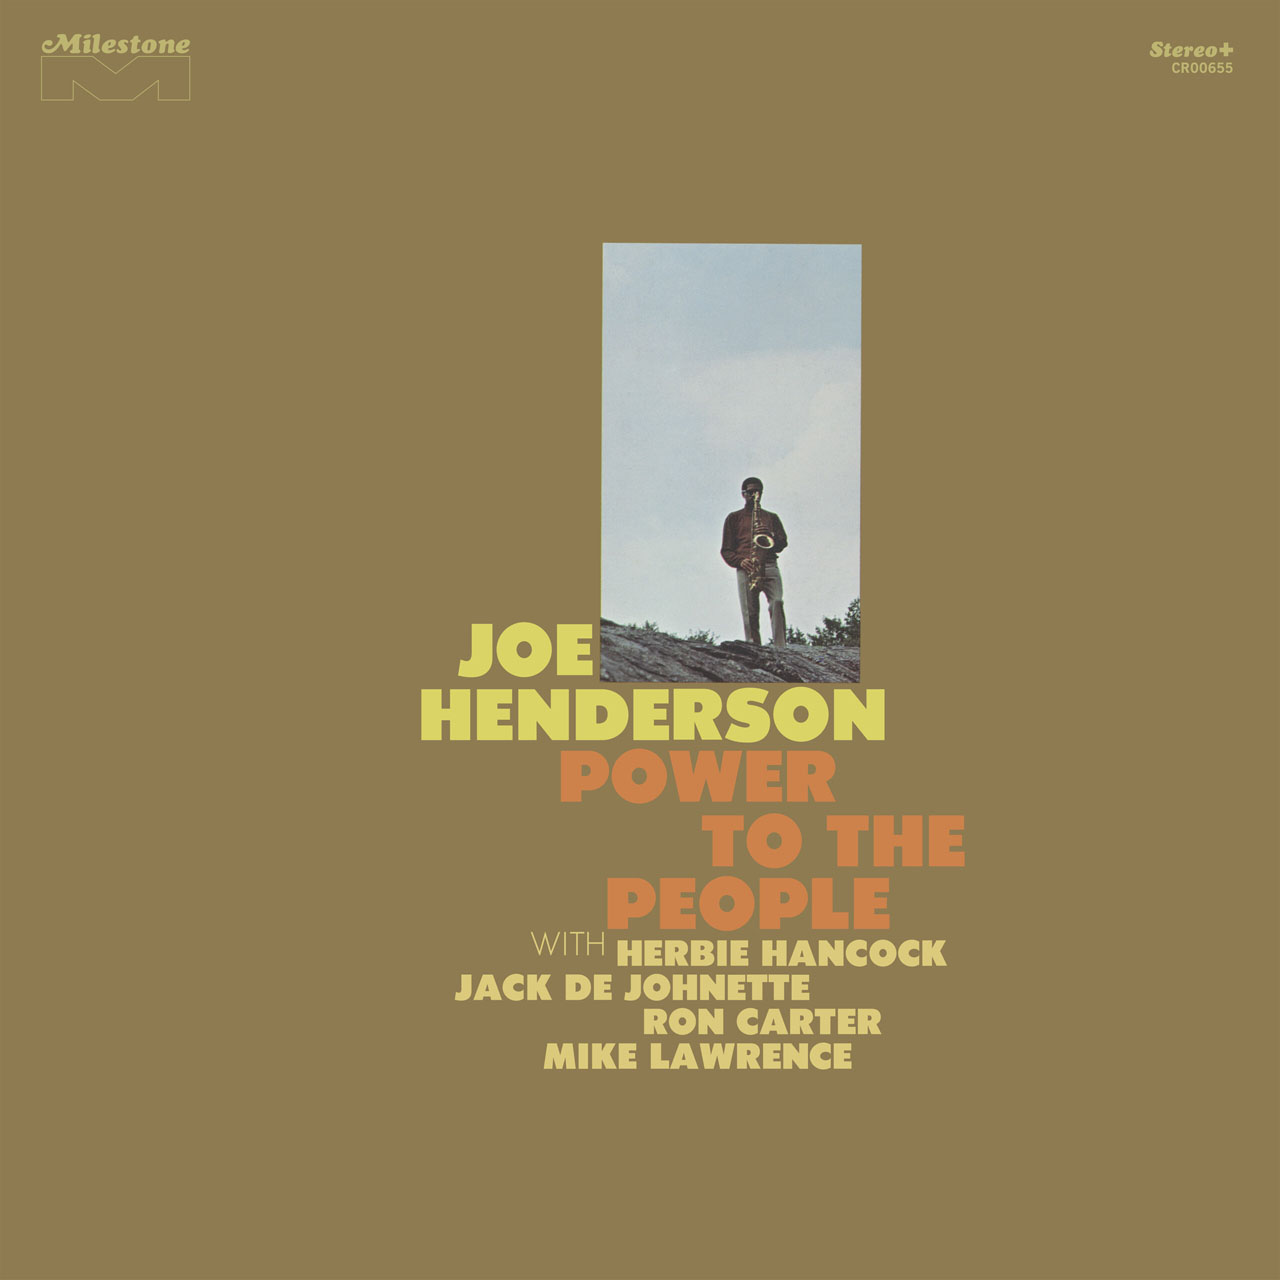 Joe Henderson Power To The People Back On Vinyl After 50 Years